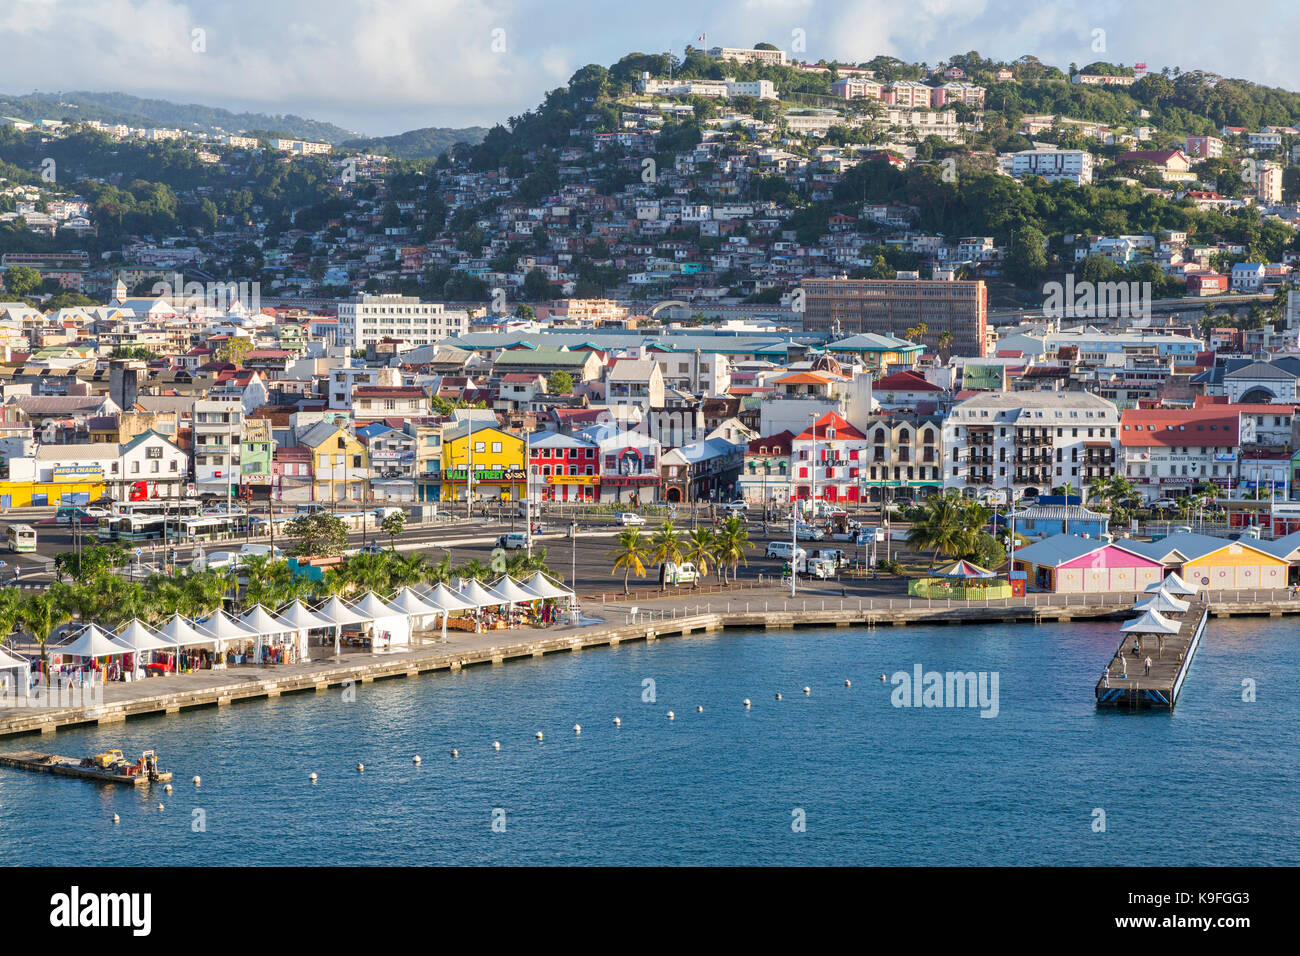 Fort-de-France, Martinique.  View of the Town from the Harbor, Early Morning. Stock Photo